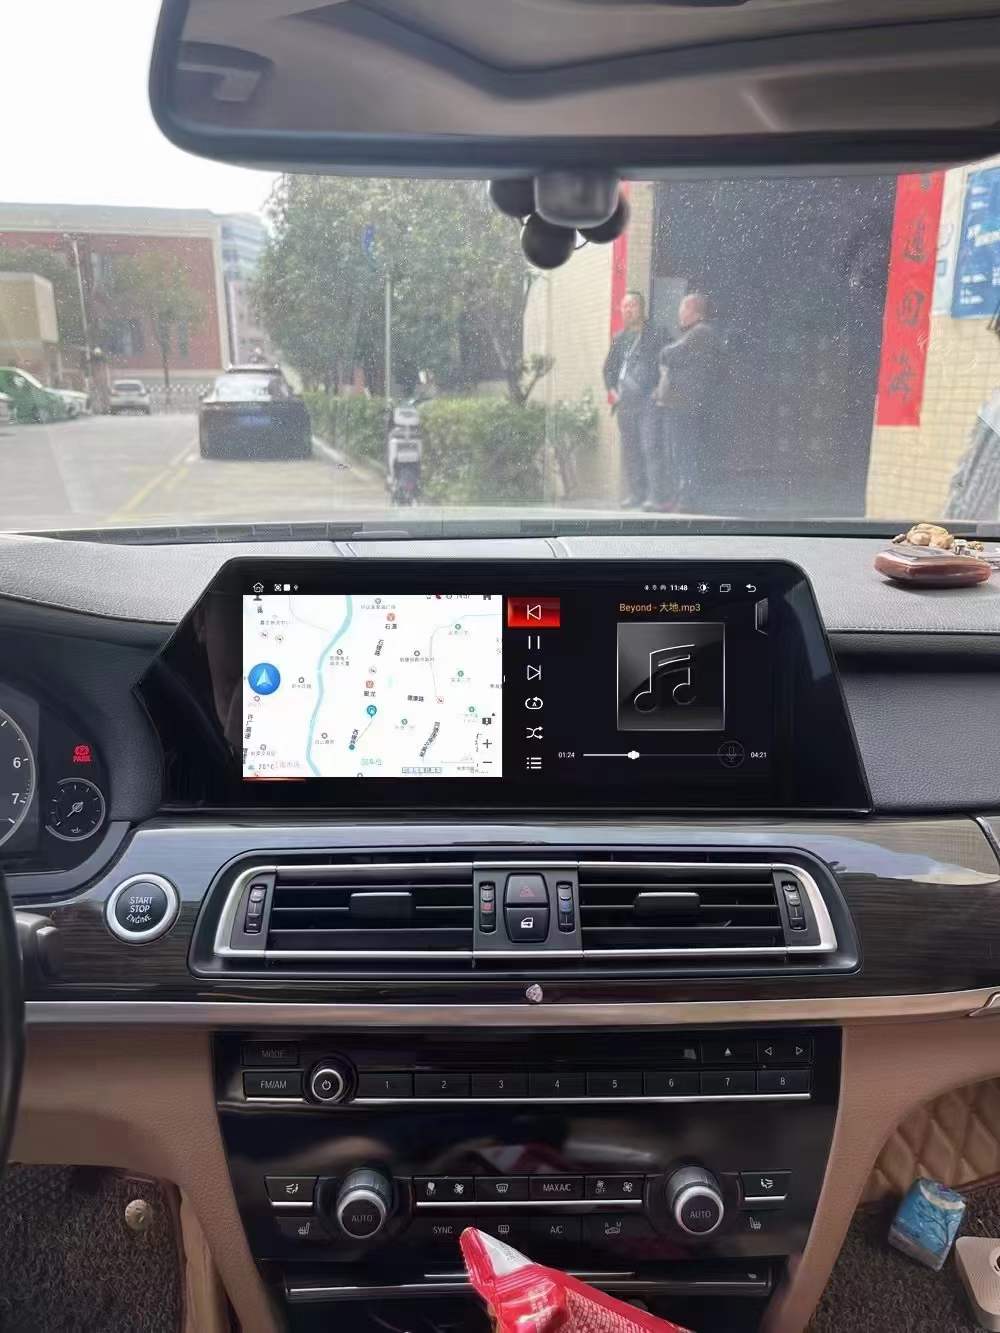 Hot Sale Android Car Dvd Radio GPS Navigation System For BMW5 Series F10 11-17